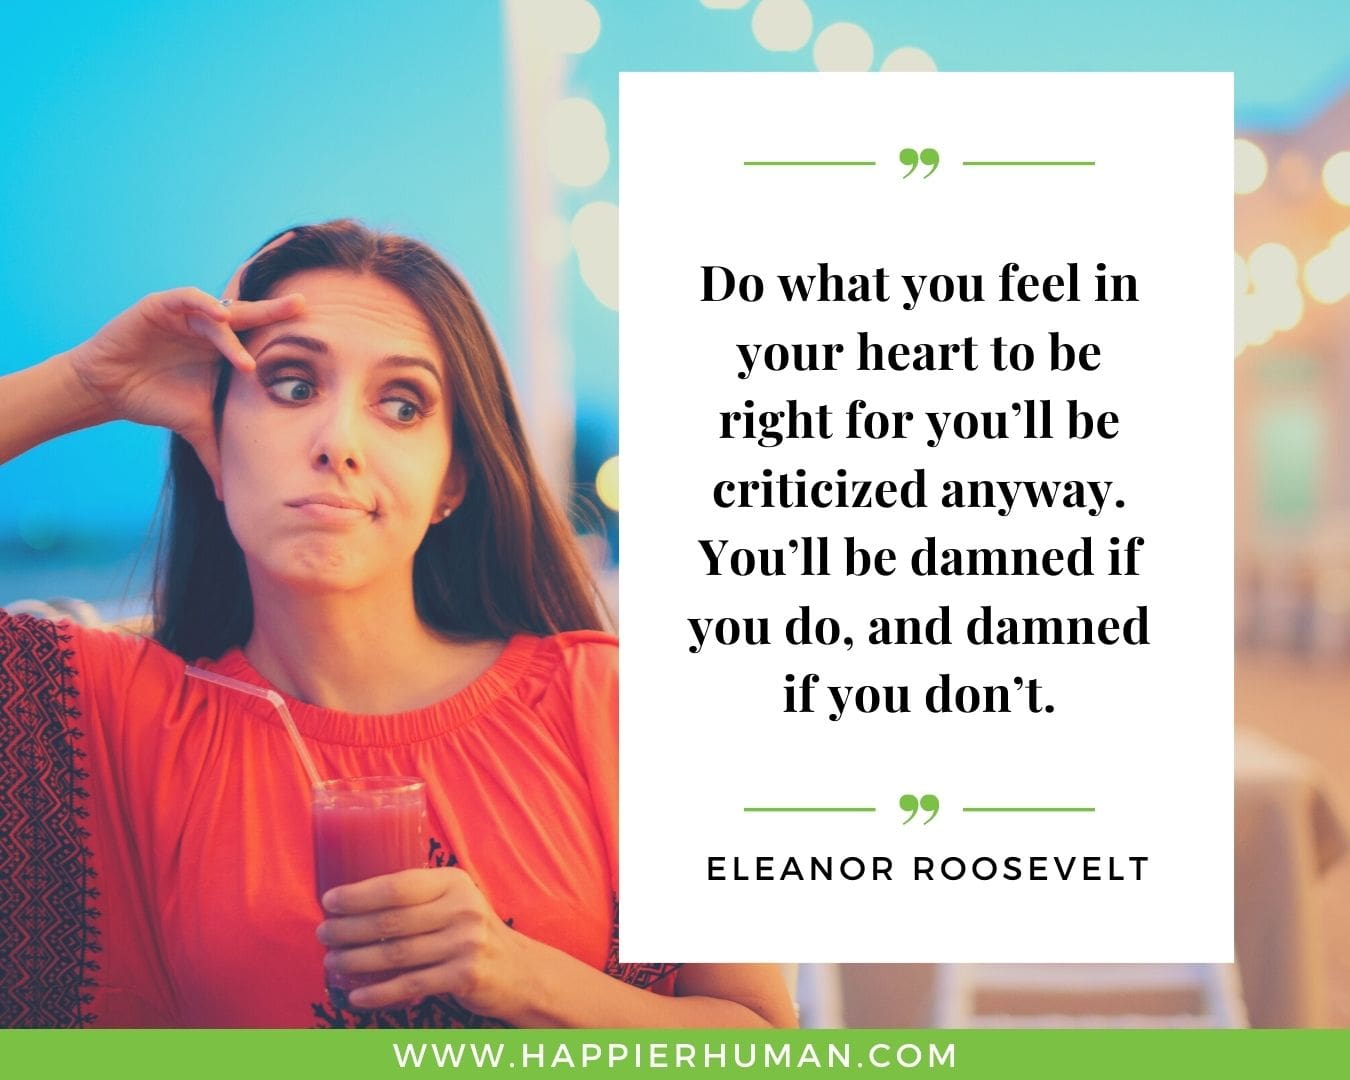 Introvert Quotes - “Do what you feel in your heart to be right for you’ll be criticized anyway. You’ll be damned if you do, and damned if you don’t.” – Eleanor Roosevelt